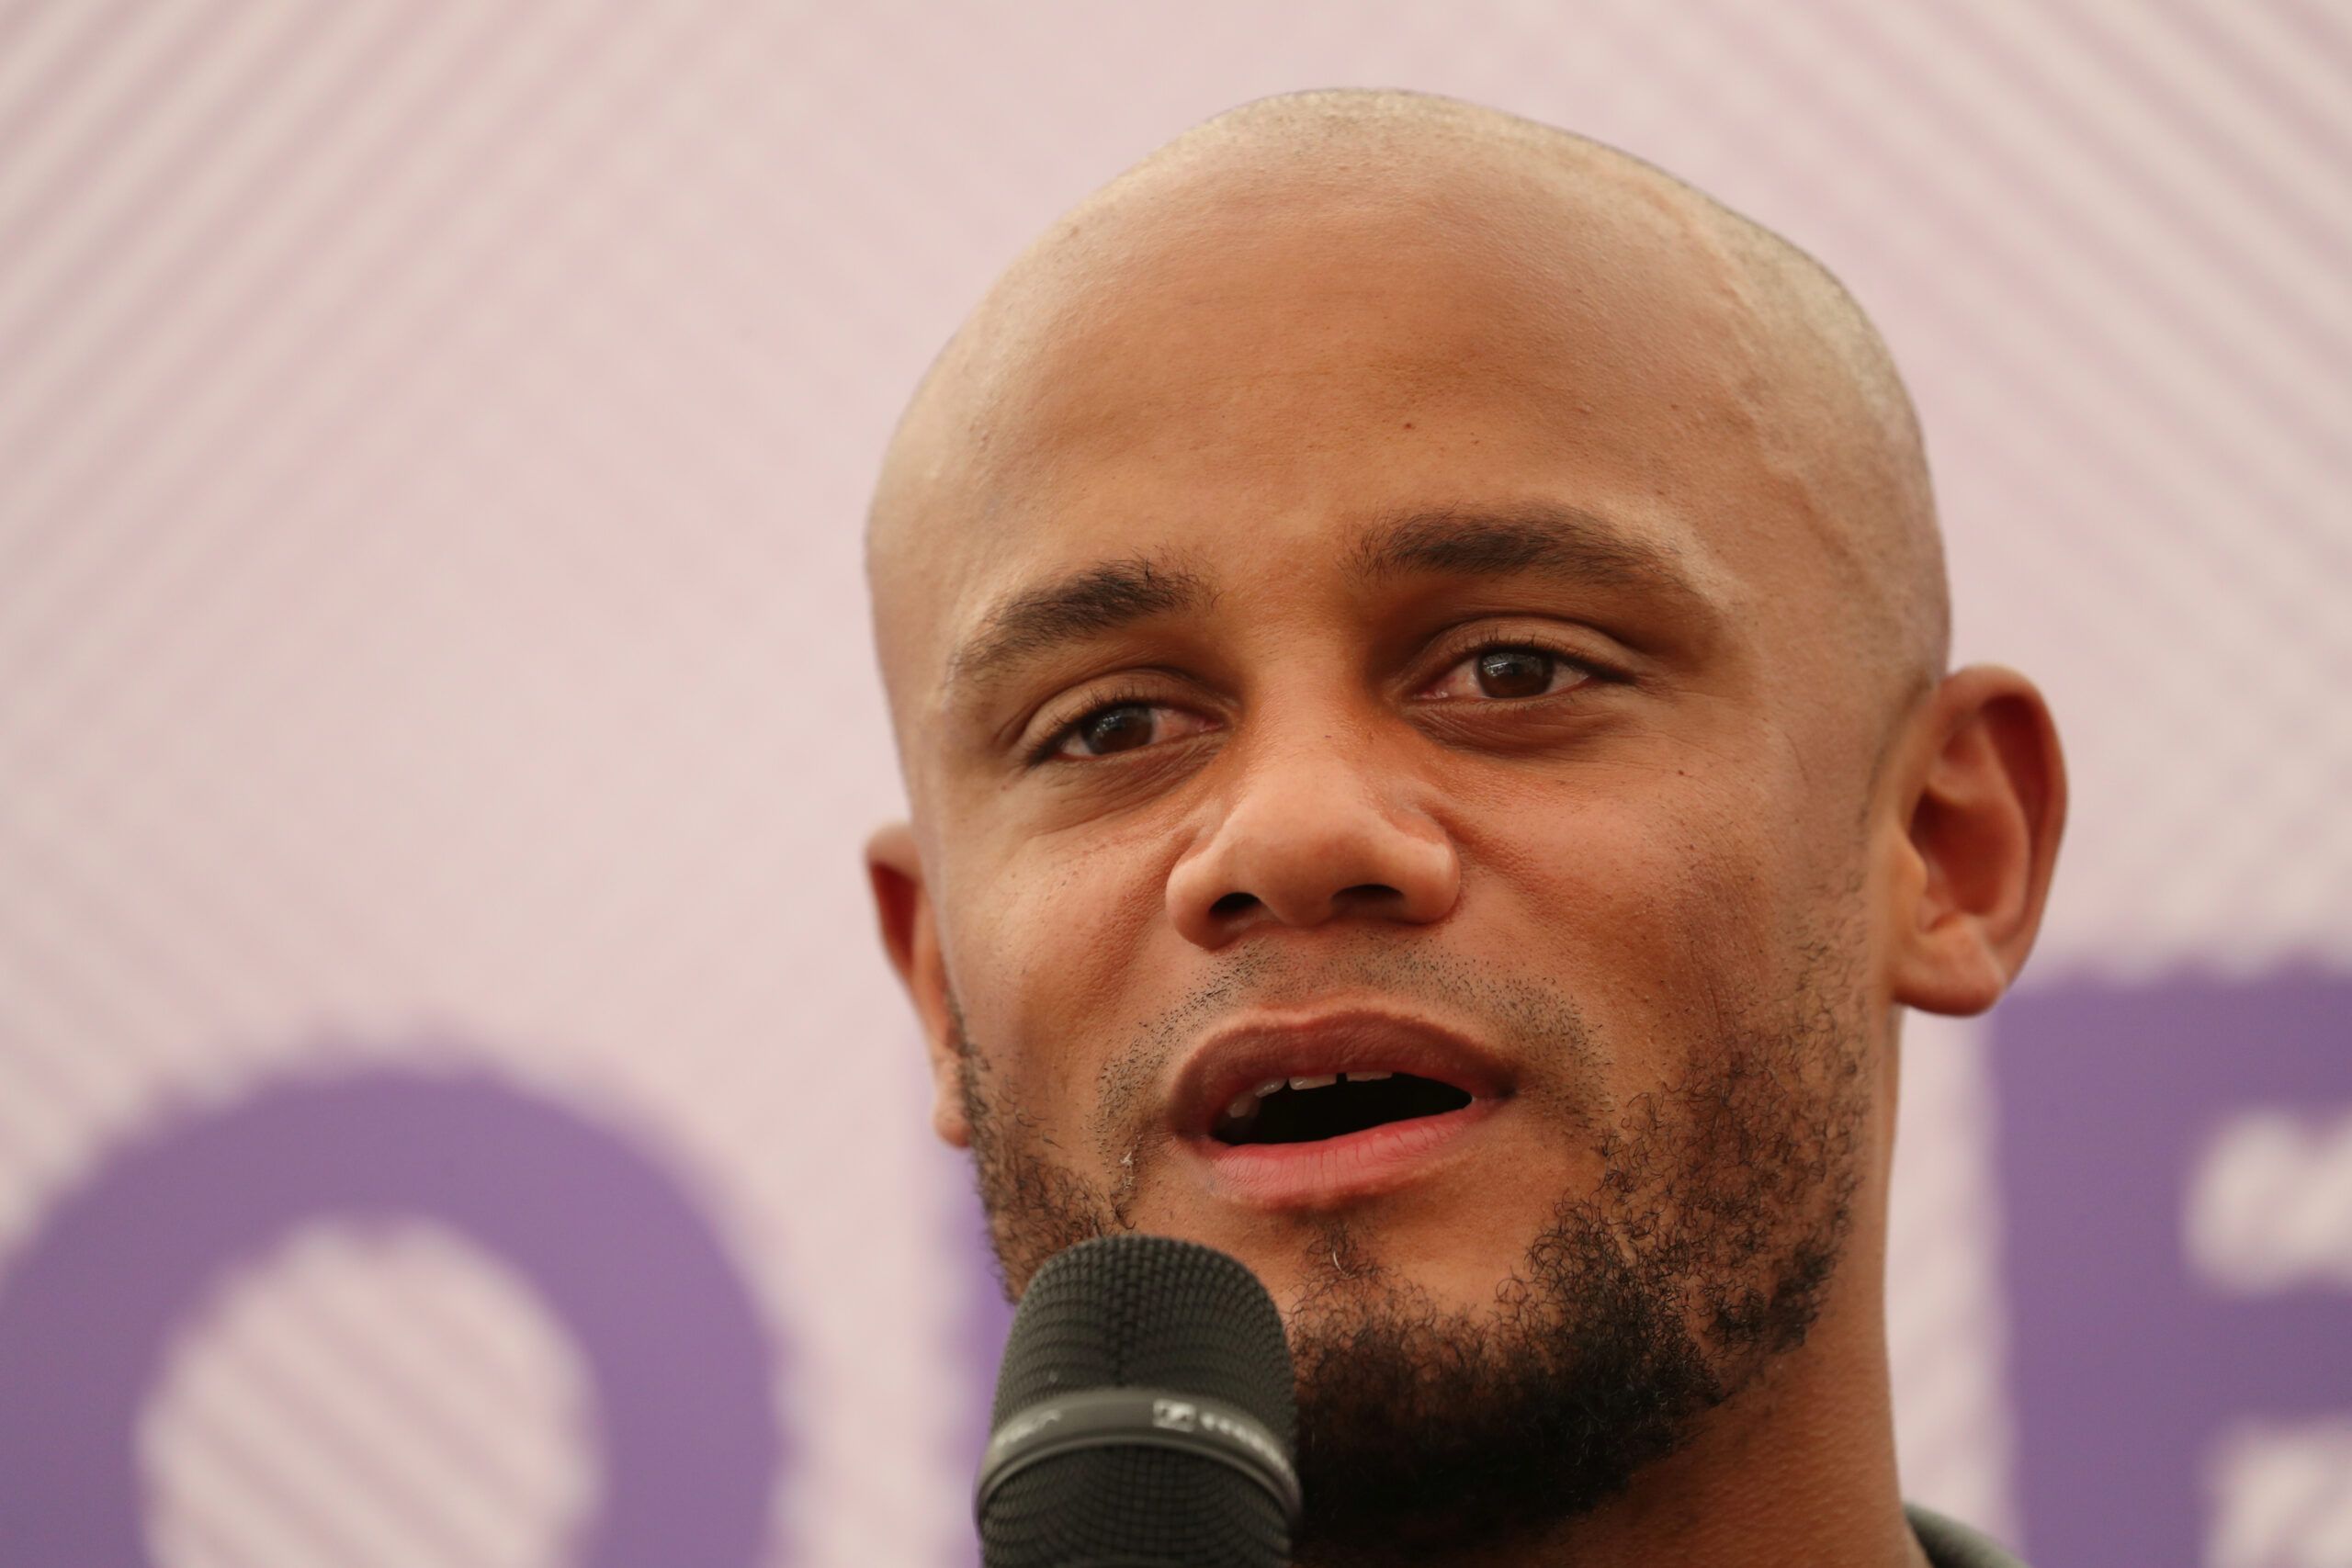 Soccer Football - Anderlecht - Vincent Kompany Press Conference - Neerpede Training Center, Brussels, Belgium - June 25, 2019  Anderlecht Player-Coach Vincent Kompany during the press conference  REUTERS/Yves Herman